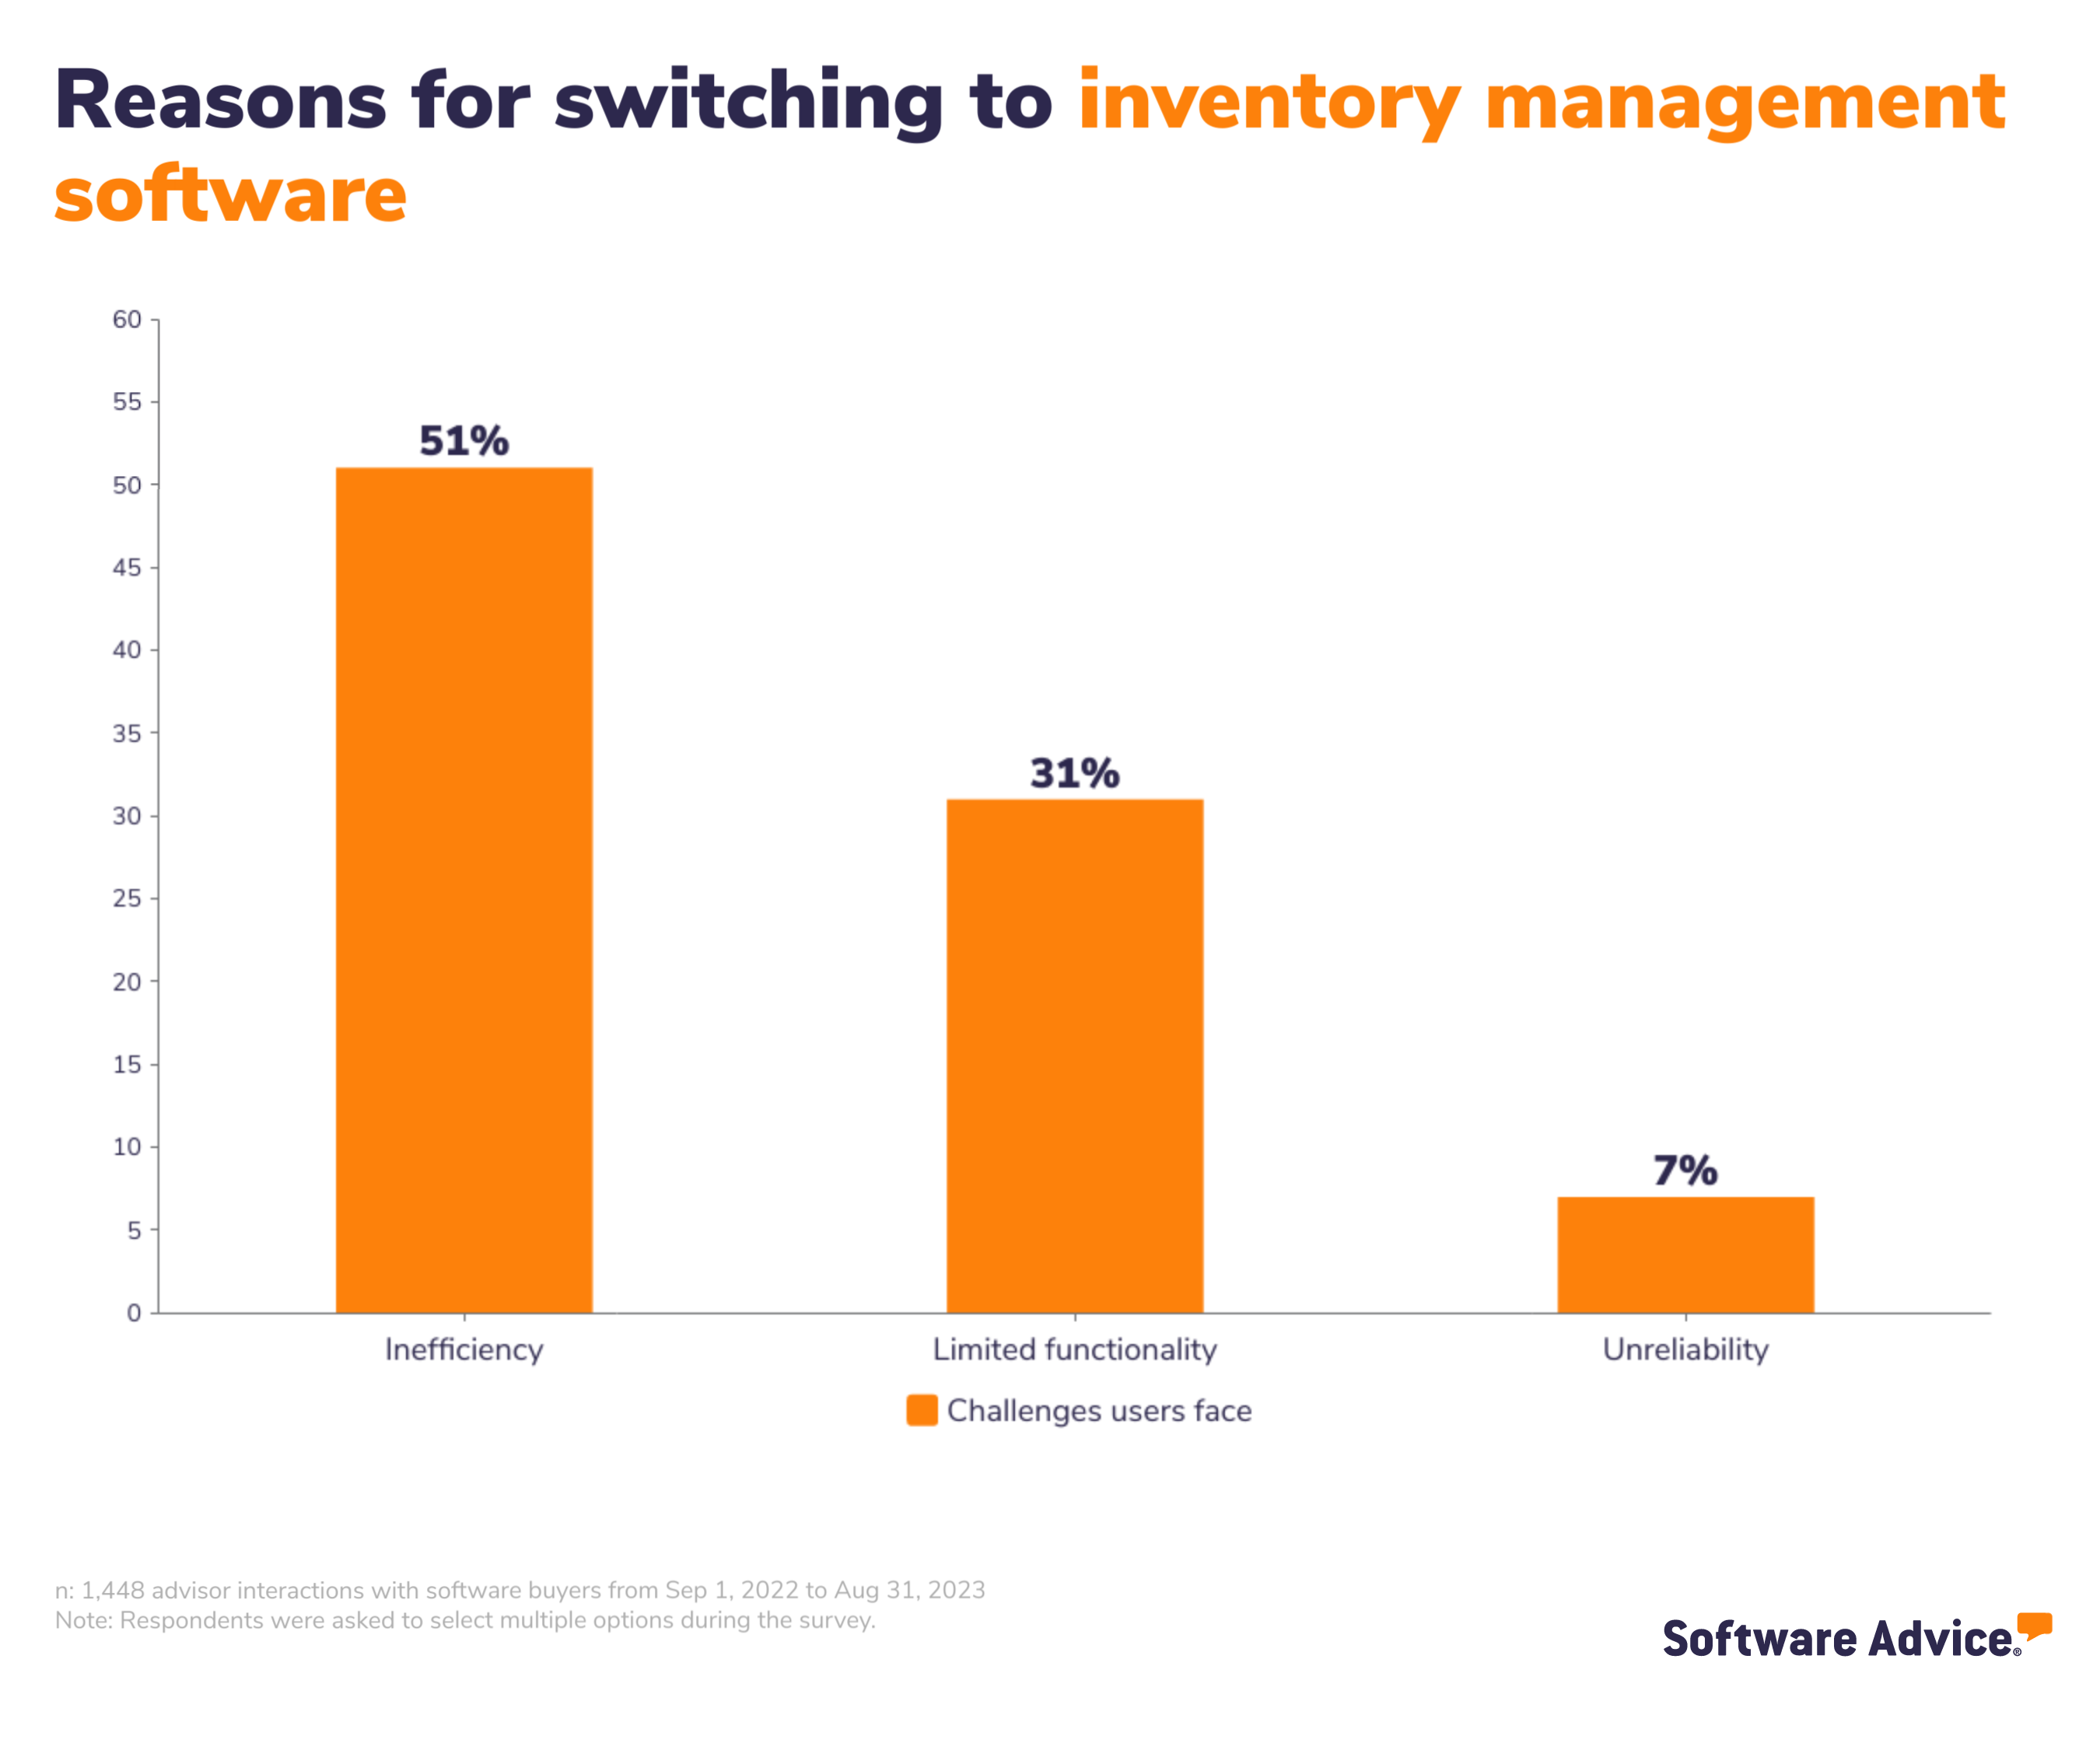 Reasons for switching to inventory management software